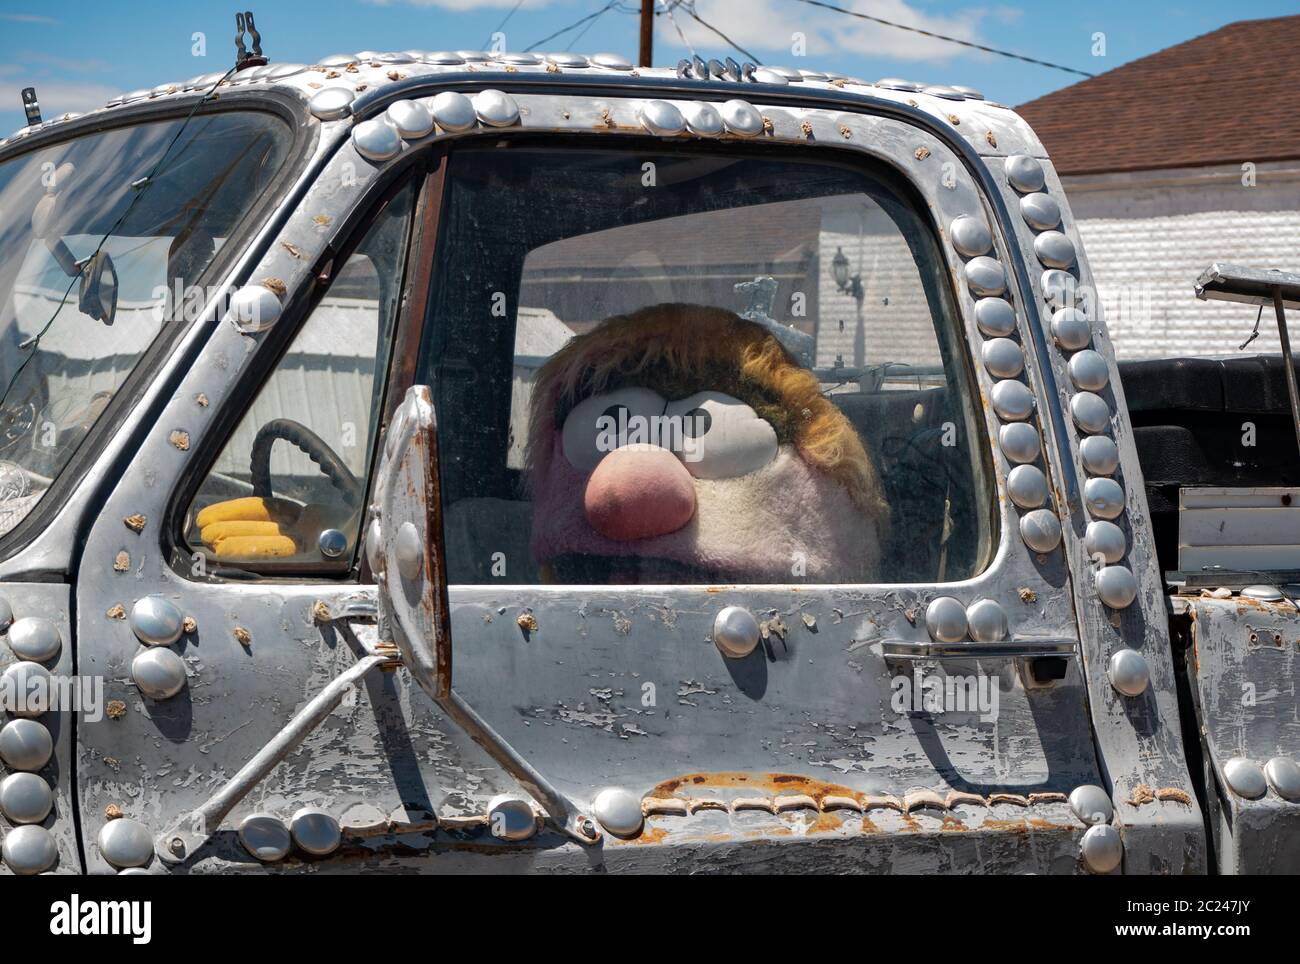 Stuffed toy figure sitting in the cab of a vintage pickup truck Stock Photo